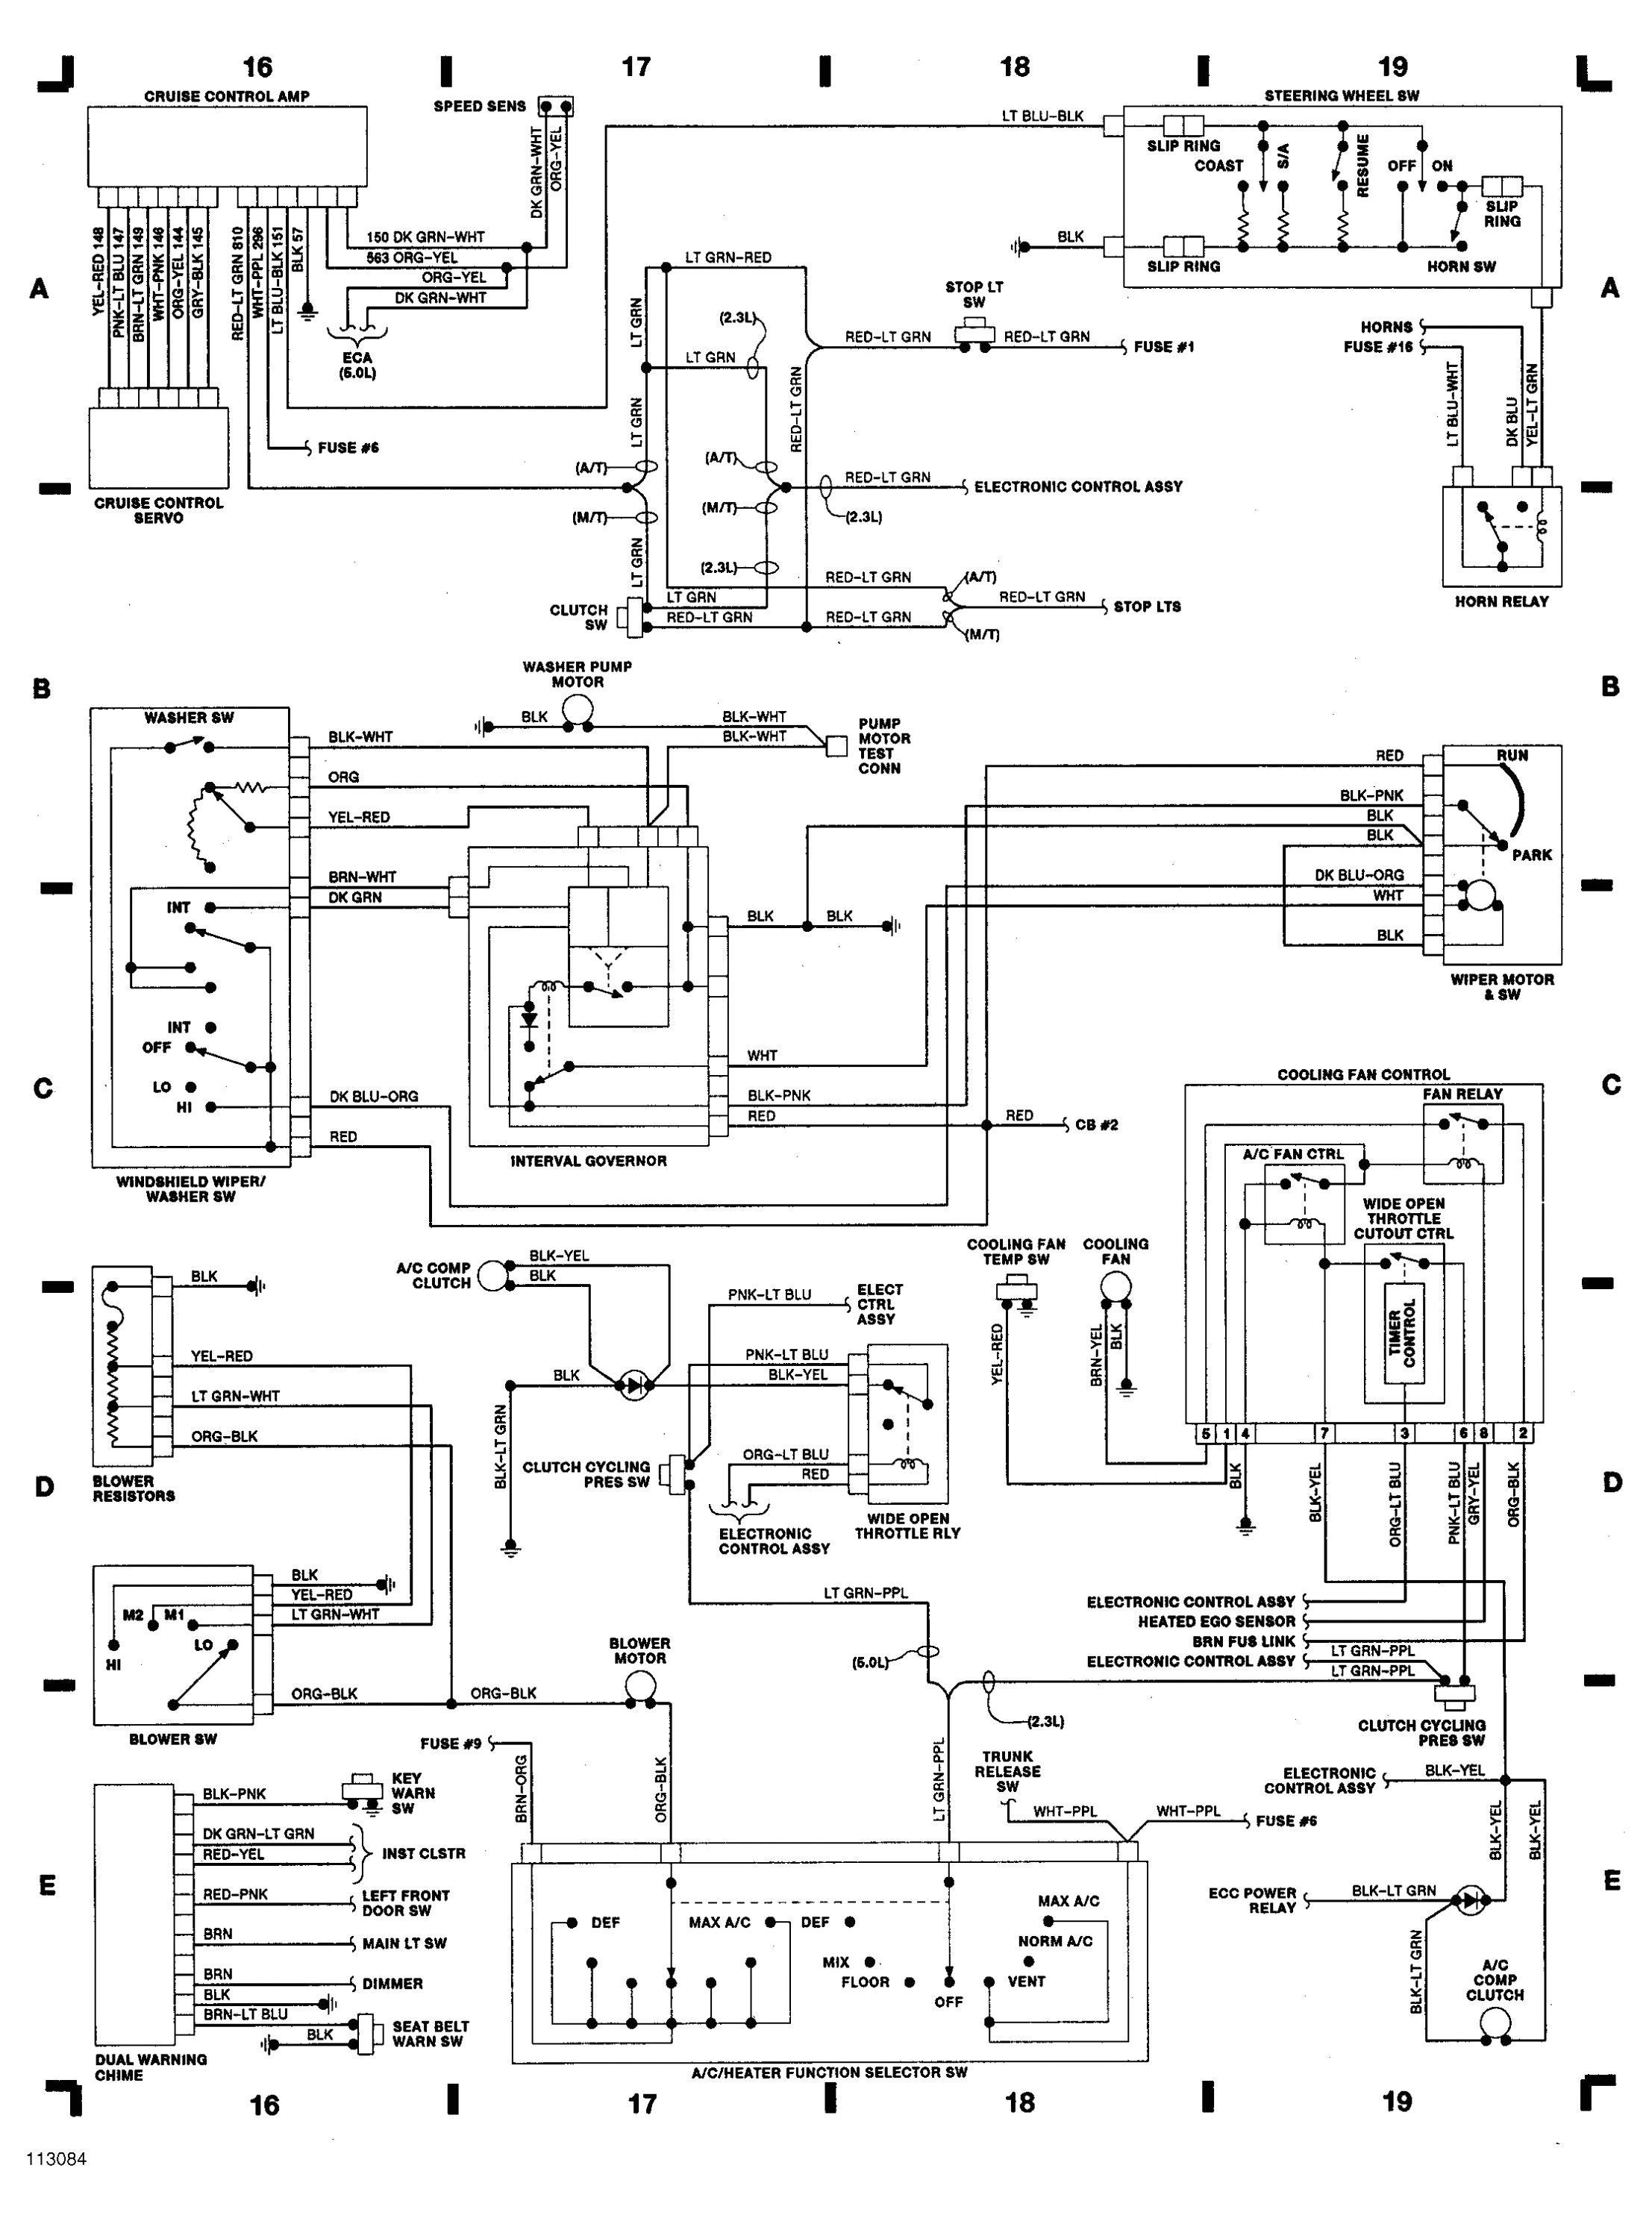 2002 ford mustang wiring harness wiring diagram database wiring diagram in addition mustang wiring harness diagram besides 1987